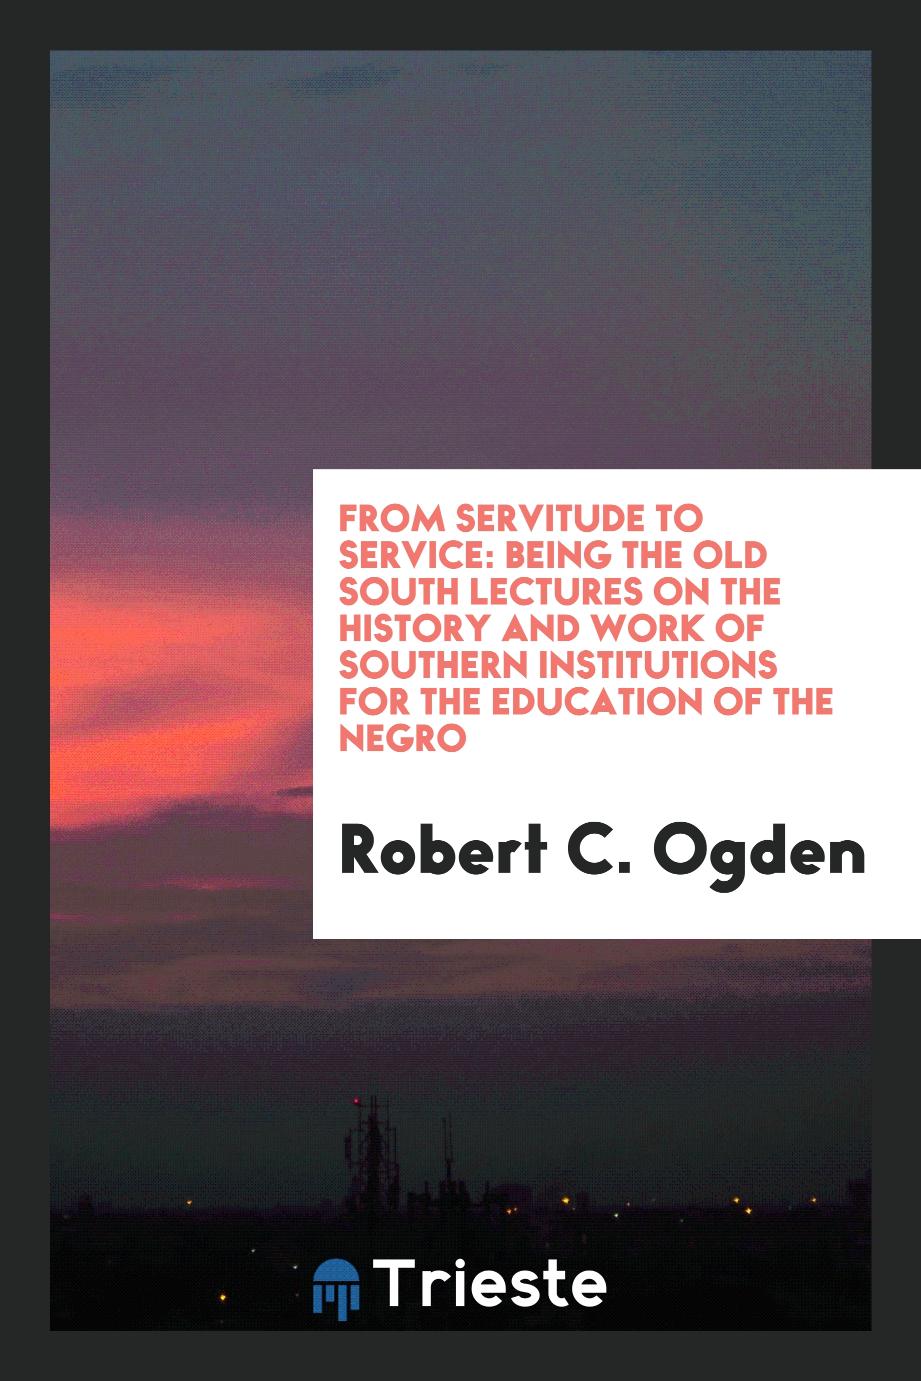 From Servitude to Service: Being the Old South Lectures on the History and Work of Southern Institutions for the Education of the Negro